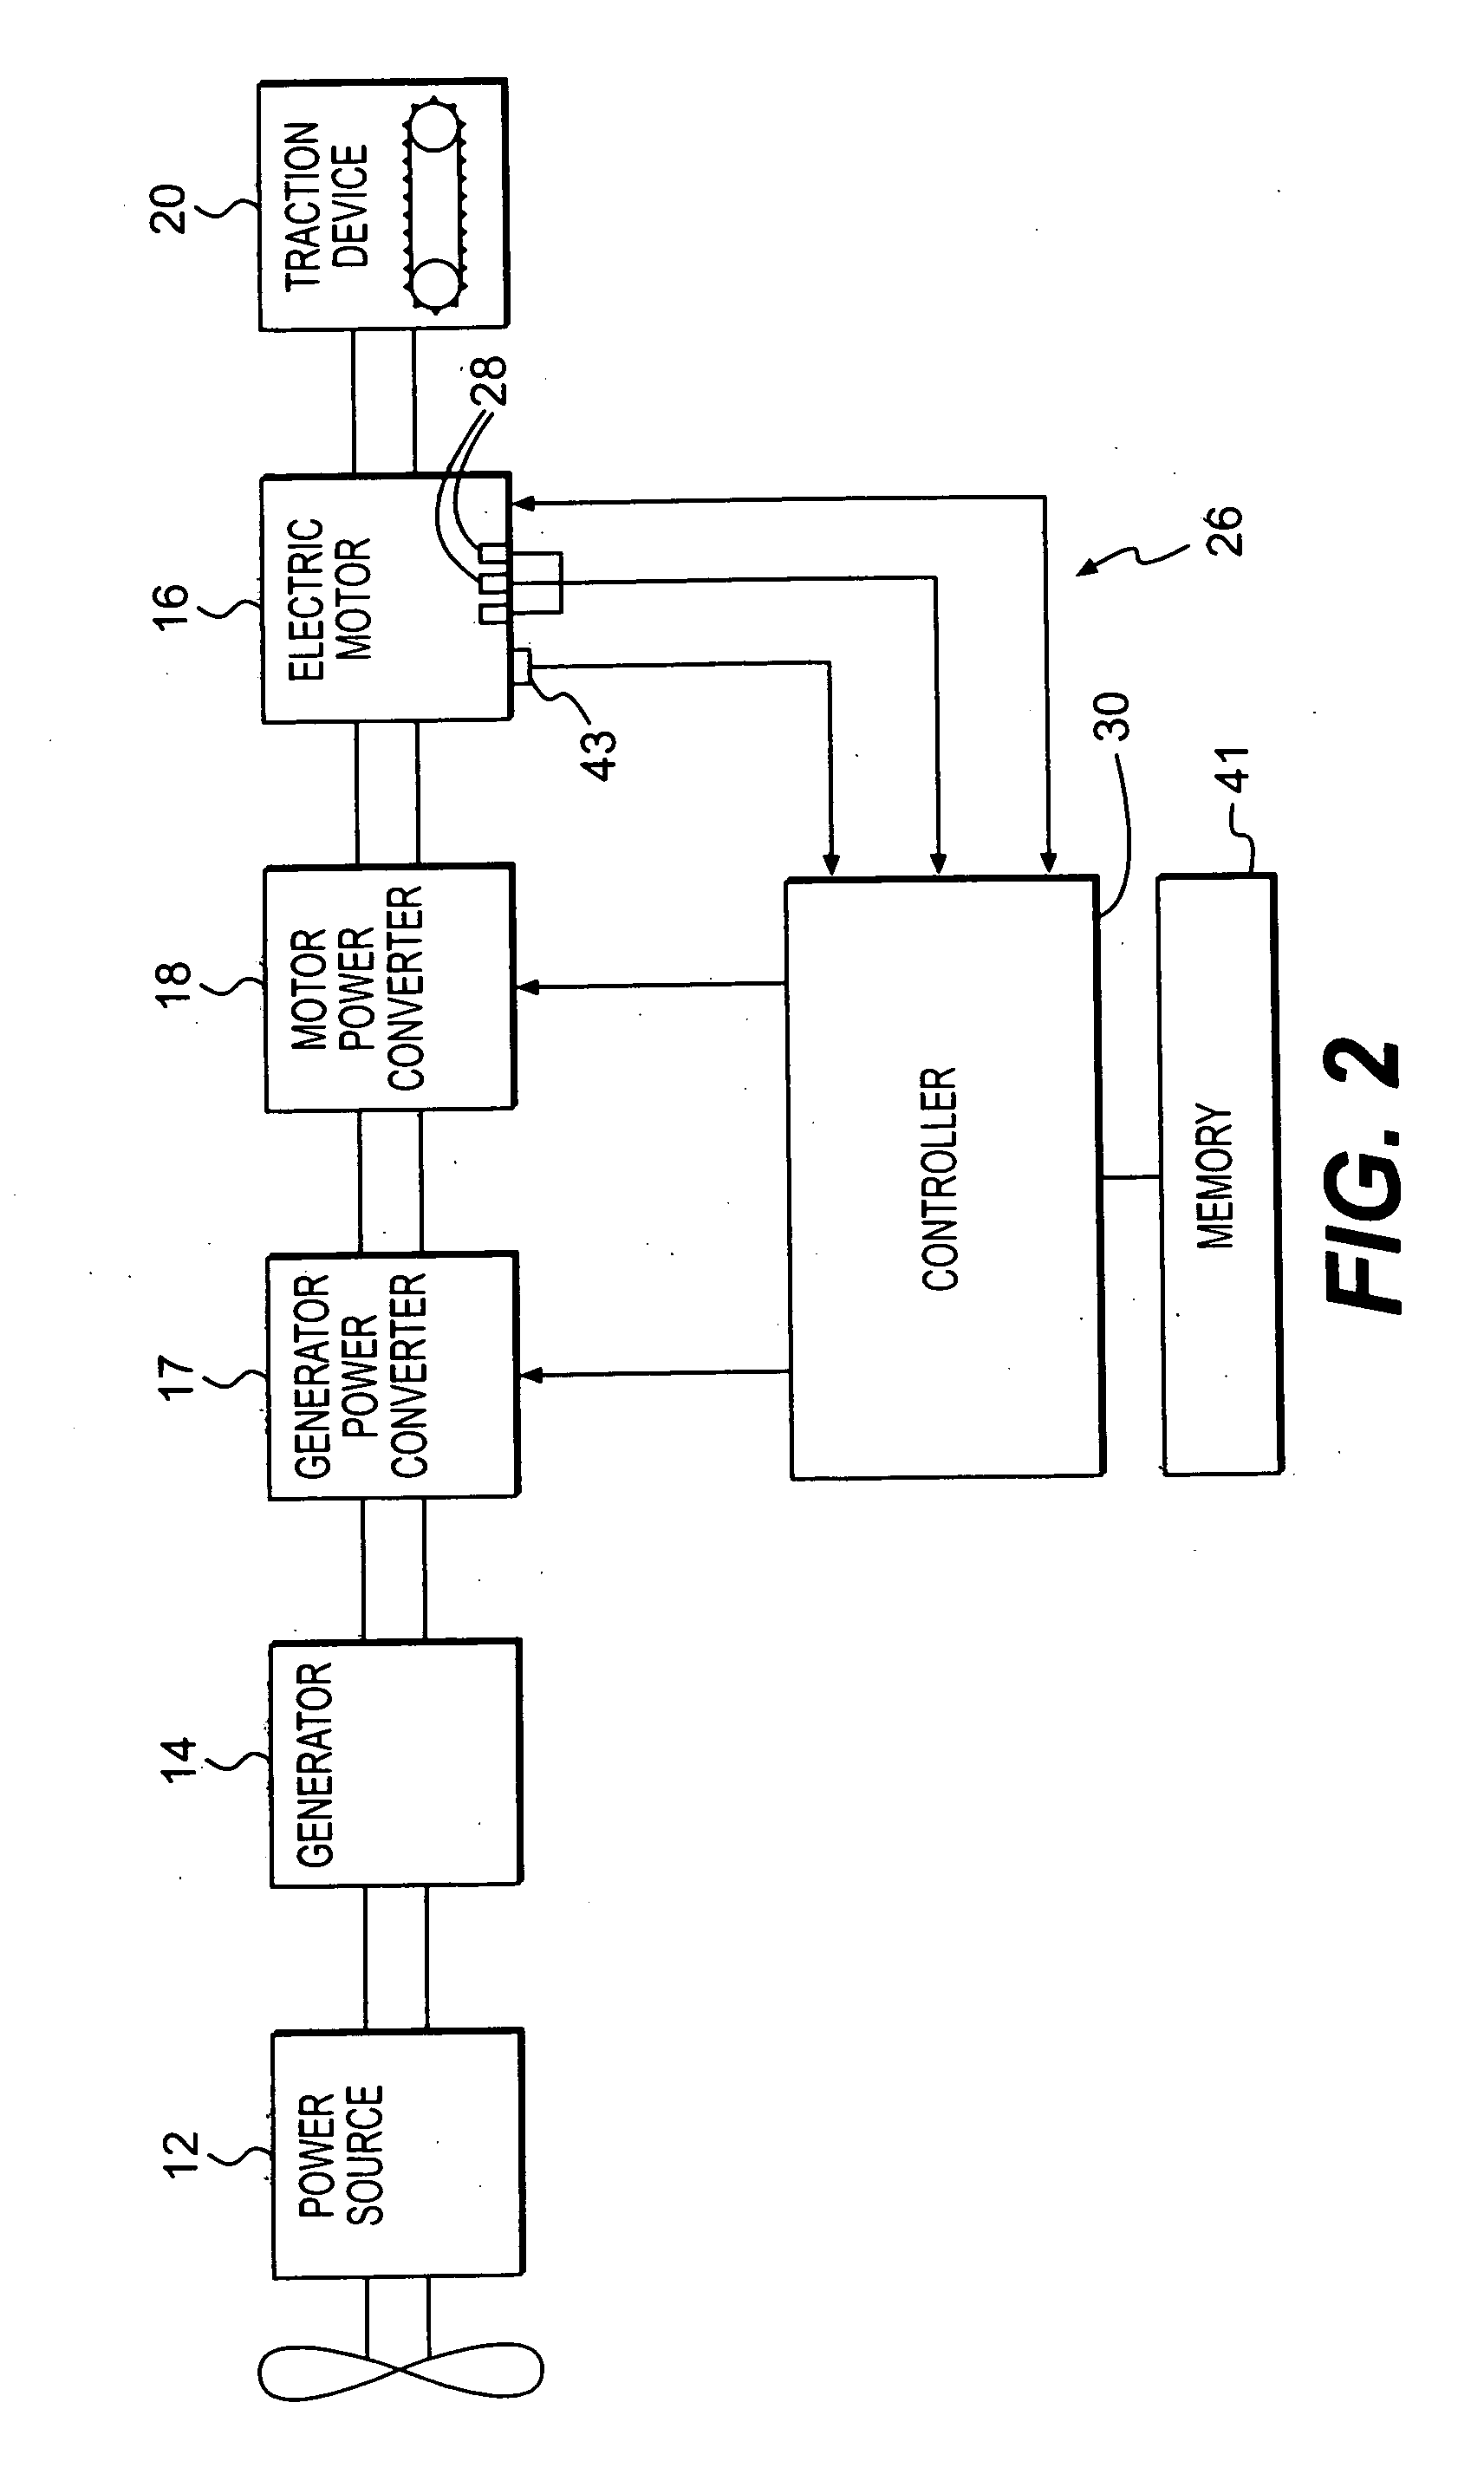 Overload protection system for an electrical device